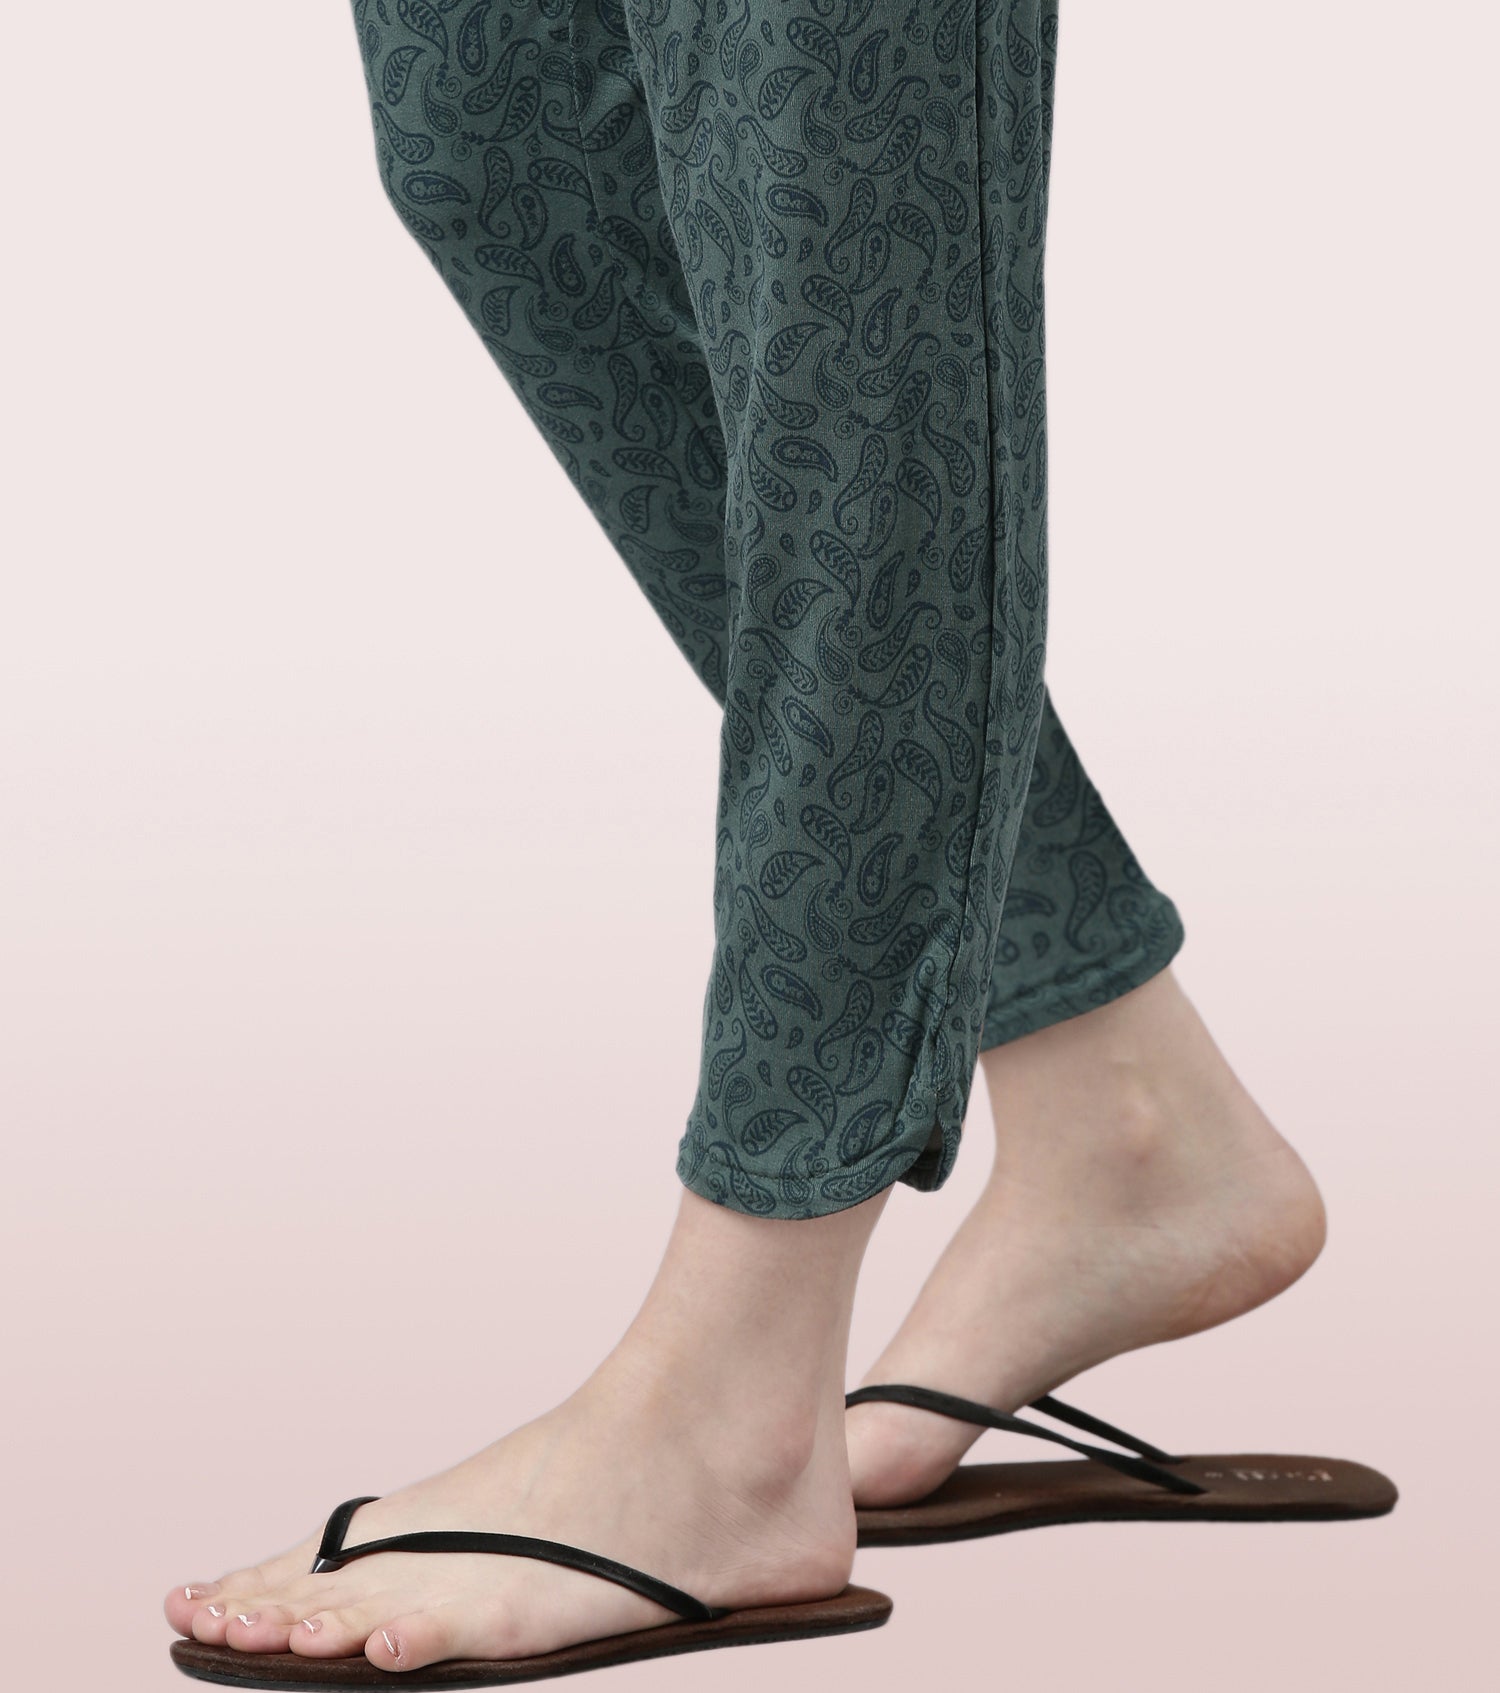 Shop-In Pants - Tapered Lounge Pants With Self Fabric Drawstring With Metal Ends | E048